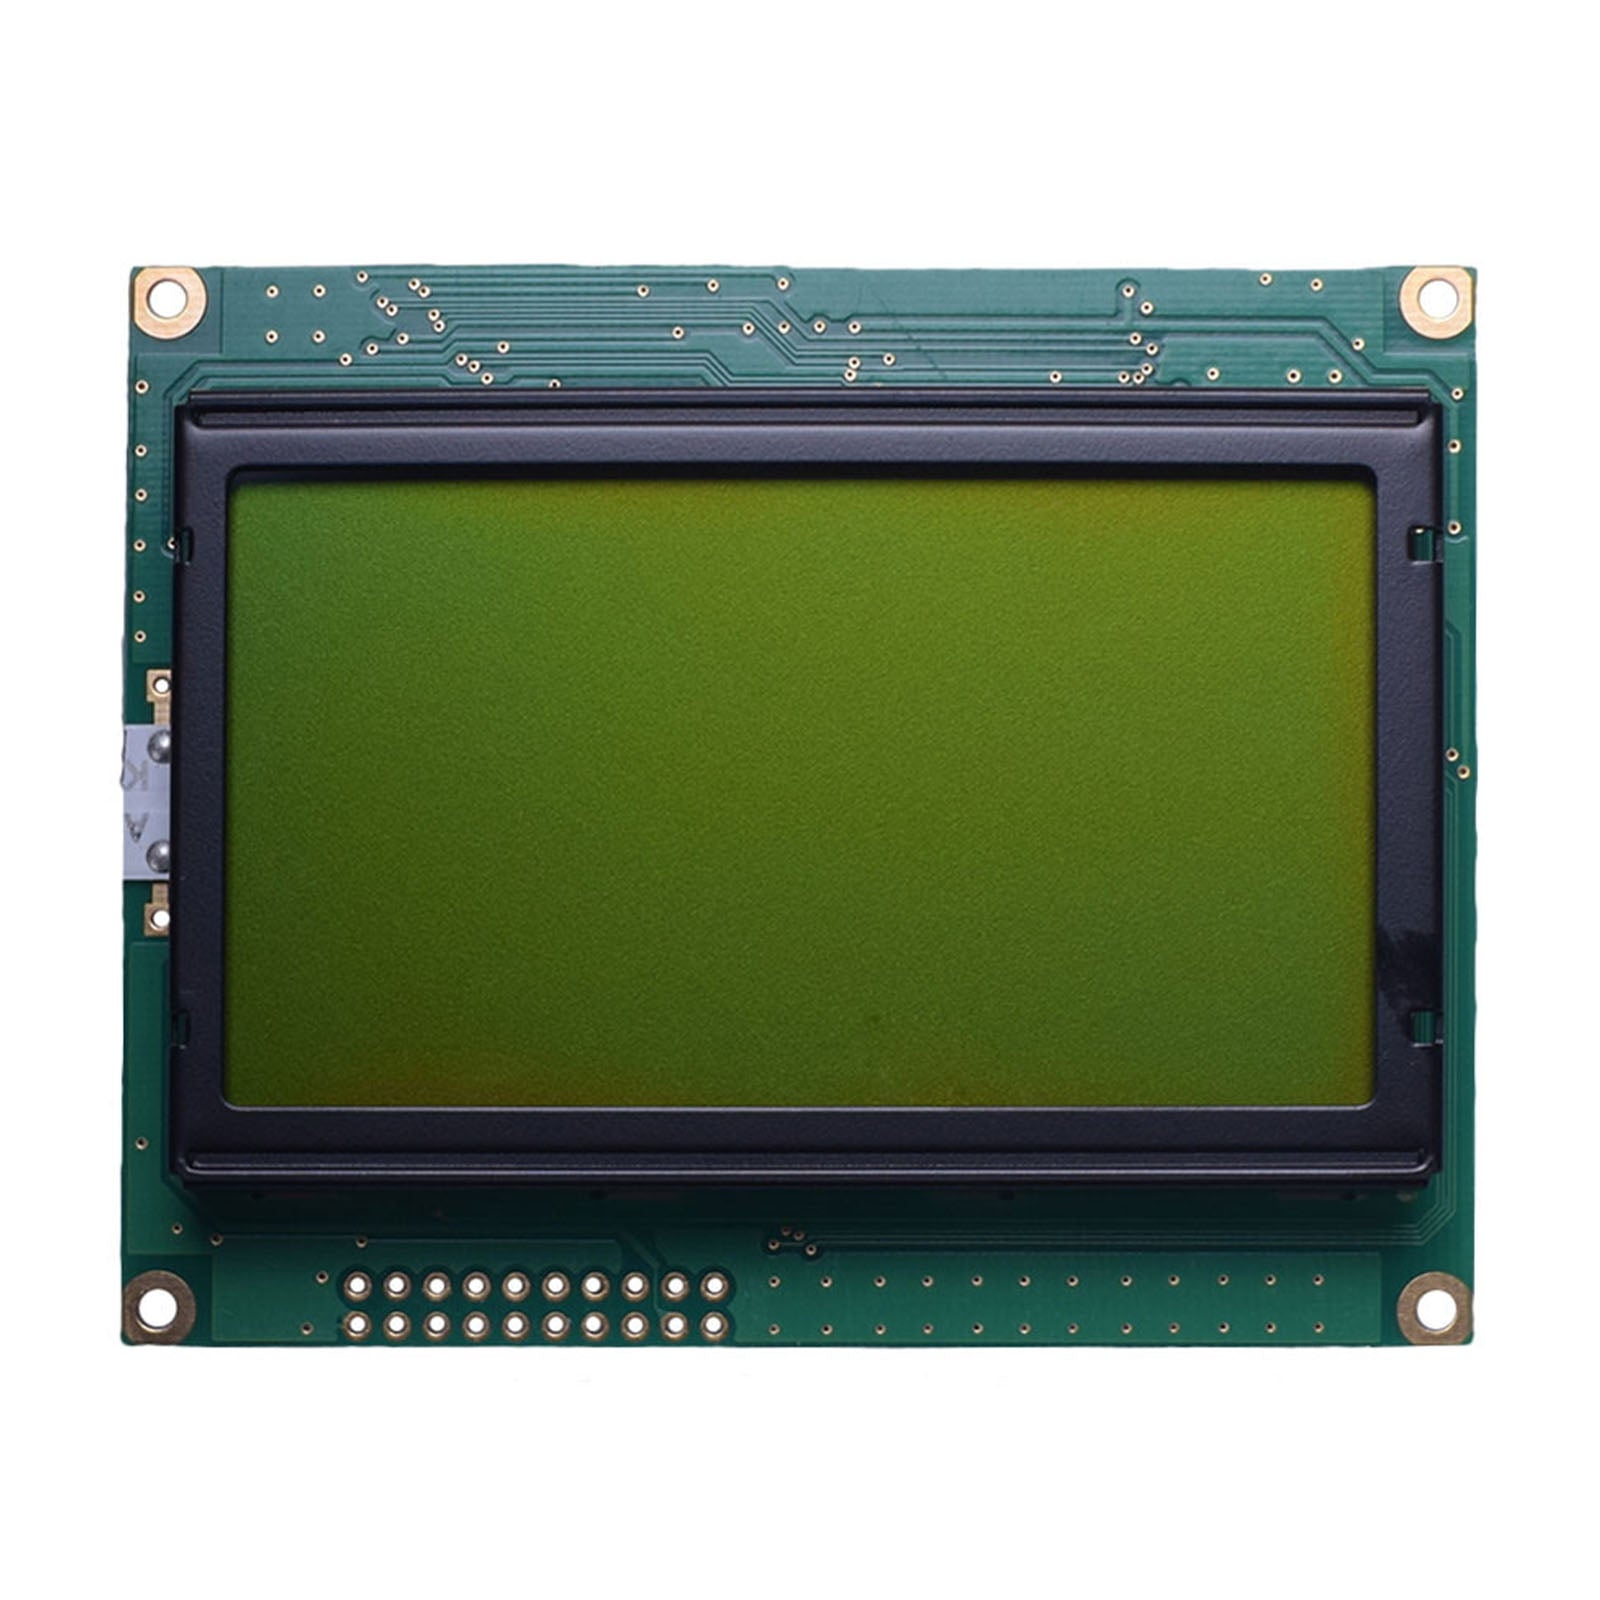 Monochrome green 128x64 LCD 3.24 inch graphic display with MCU interface